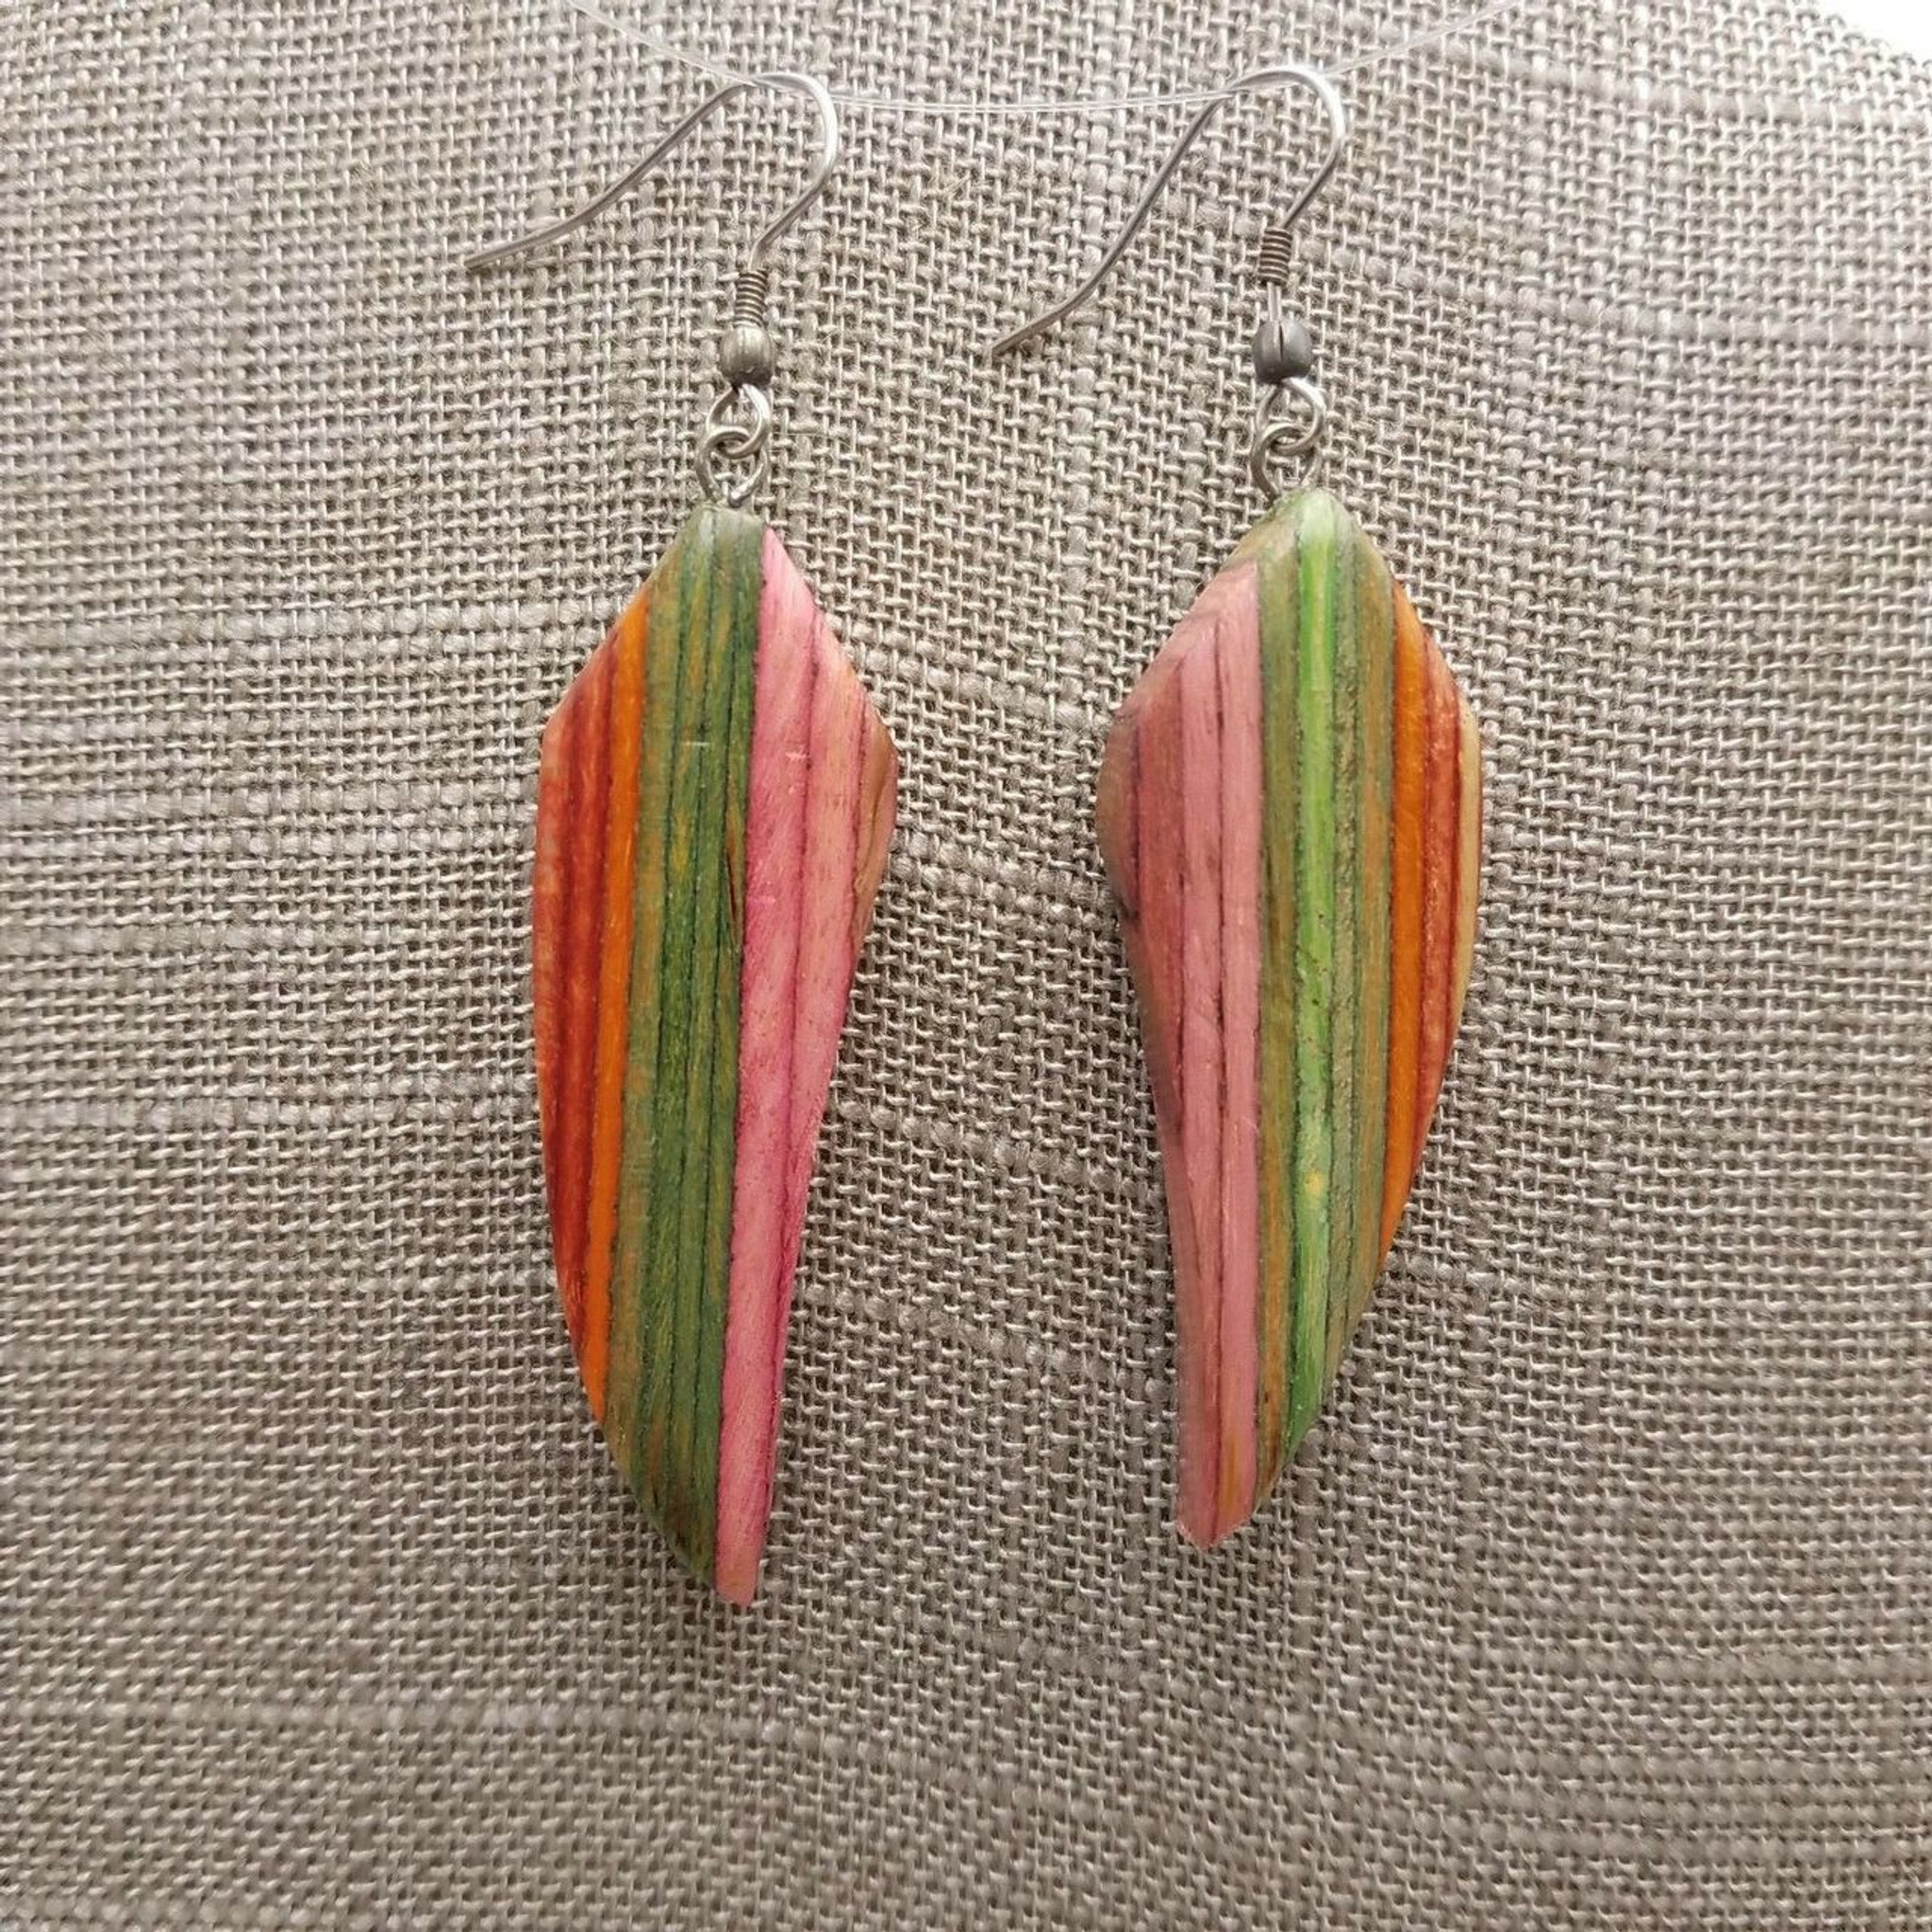 Wooden Earrings Multi Color Layered Wood Earring Fashion Jewelry